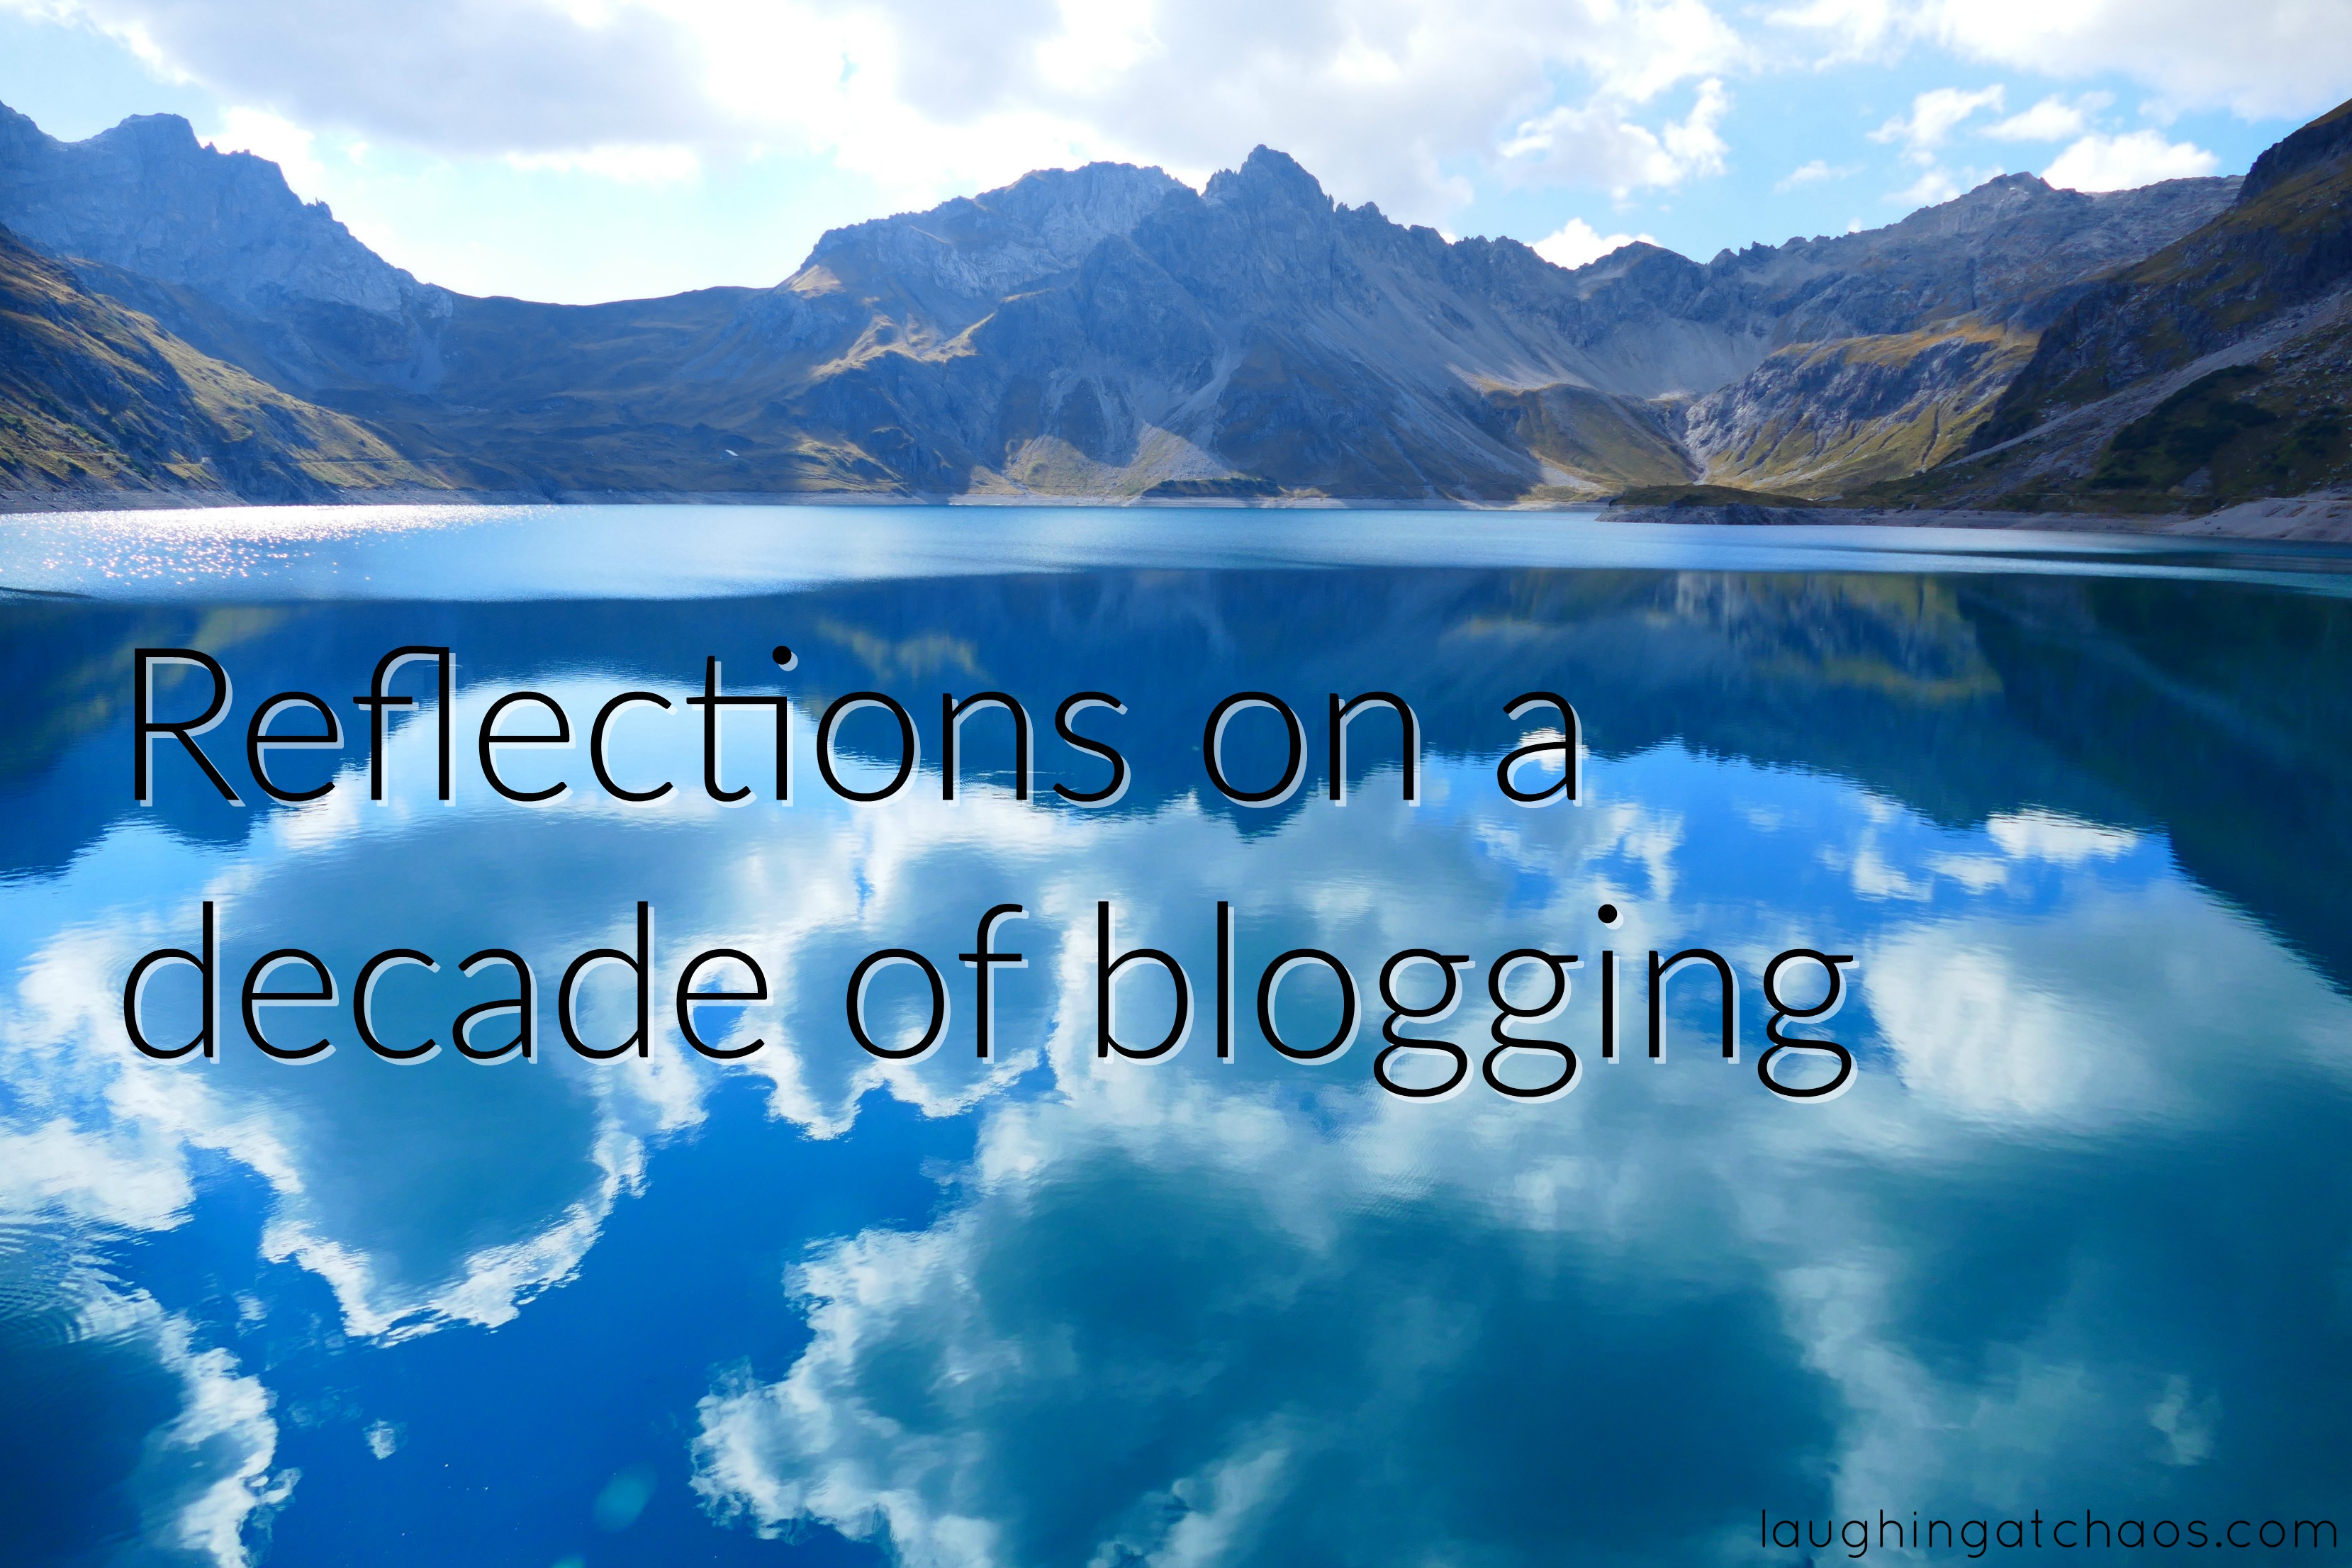 Reflections on a decade of blogging